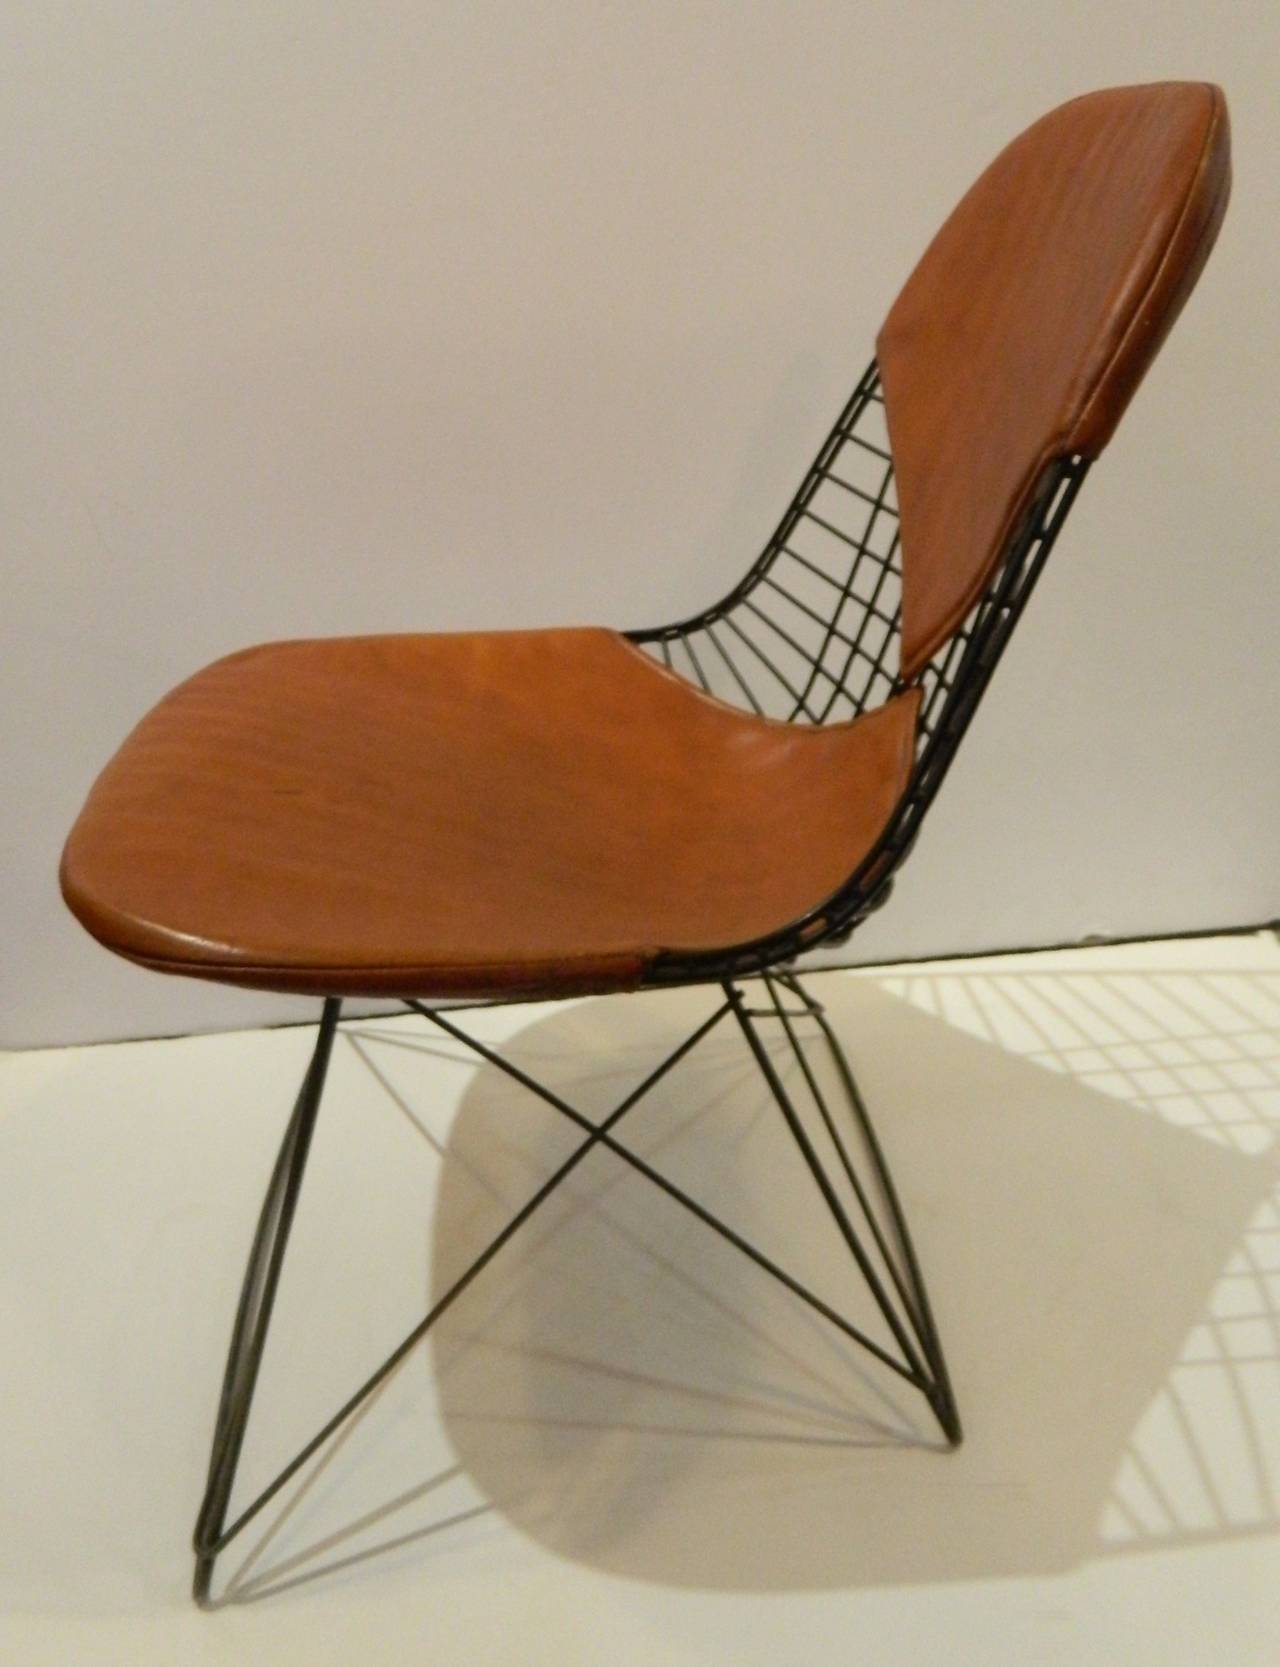 Eames LKR Lounge Chair In Good Condition For Sale In Houston, TX